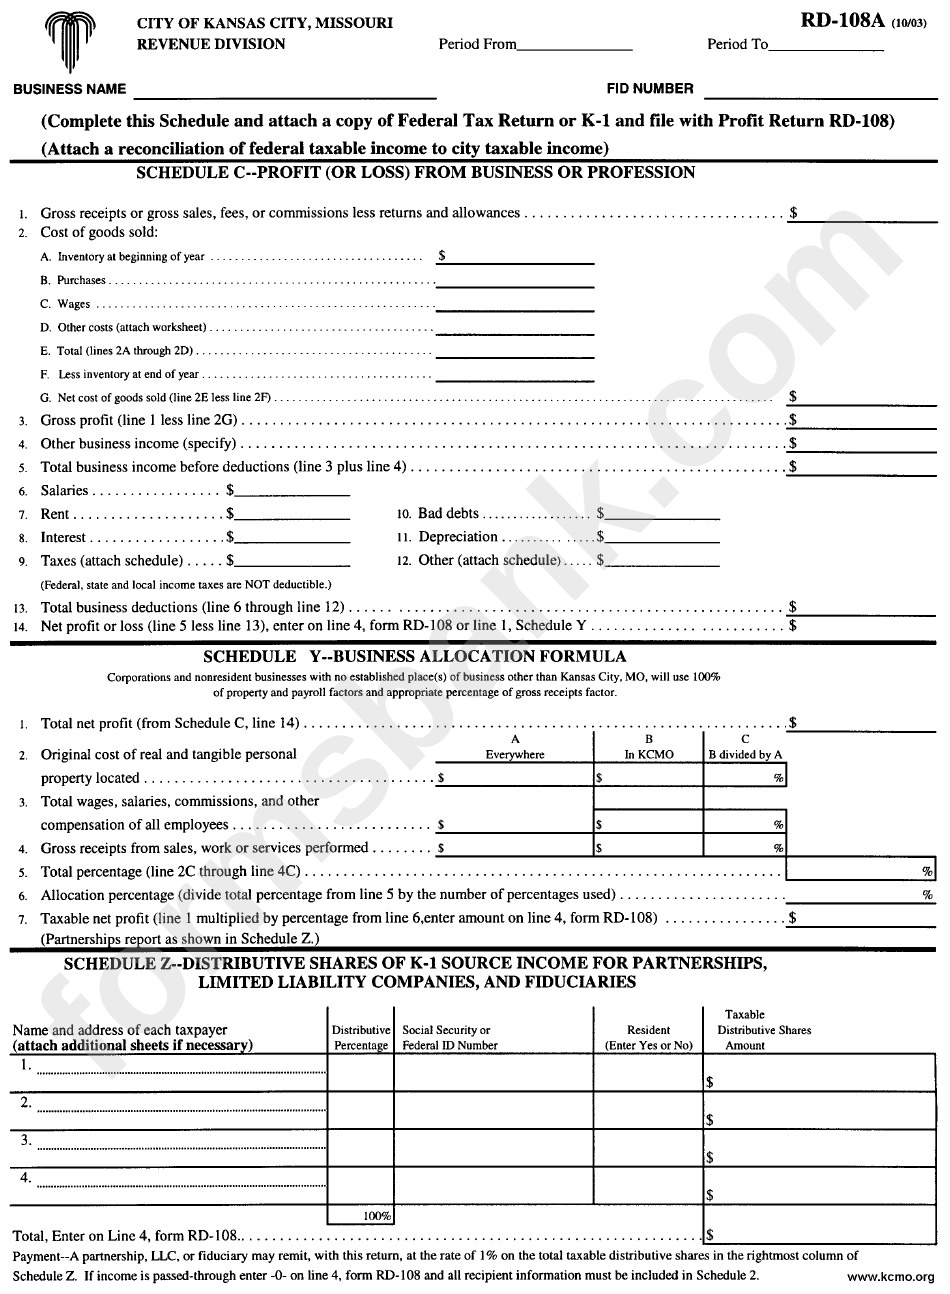 Form Rd-108a - Schedule C-Profit (Or Loss) From Business Or Profession Form - Revenue Division - Kansas City - Missouri